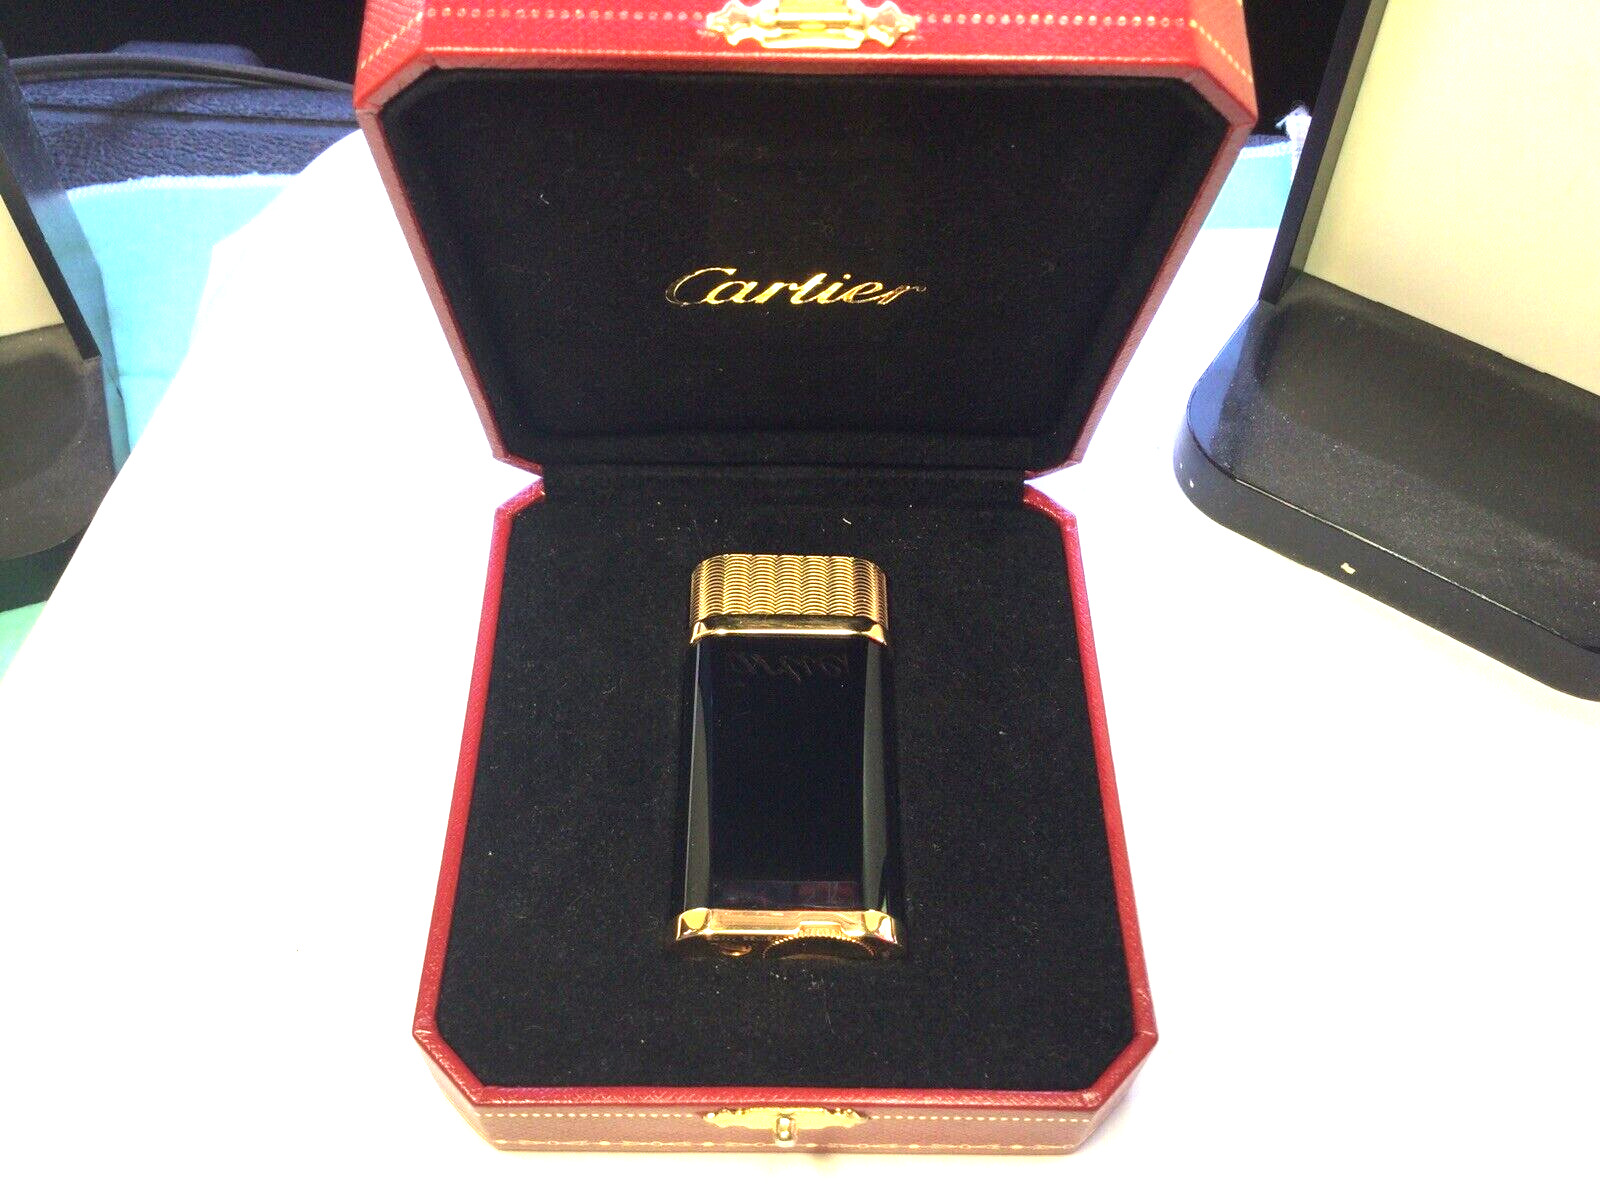 CARTIER OVAL GUILLOCHE BLACK DECOR LIGHTER W/ BOX!. Available Now for 250.00